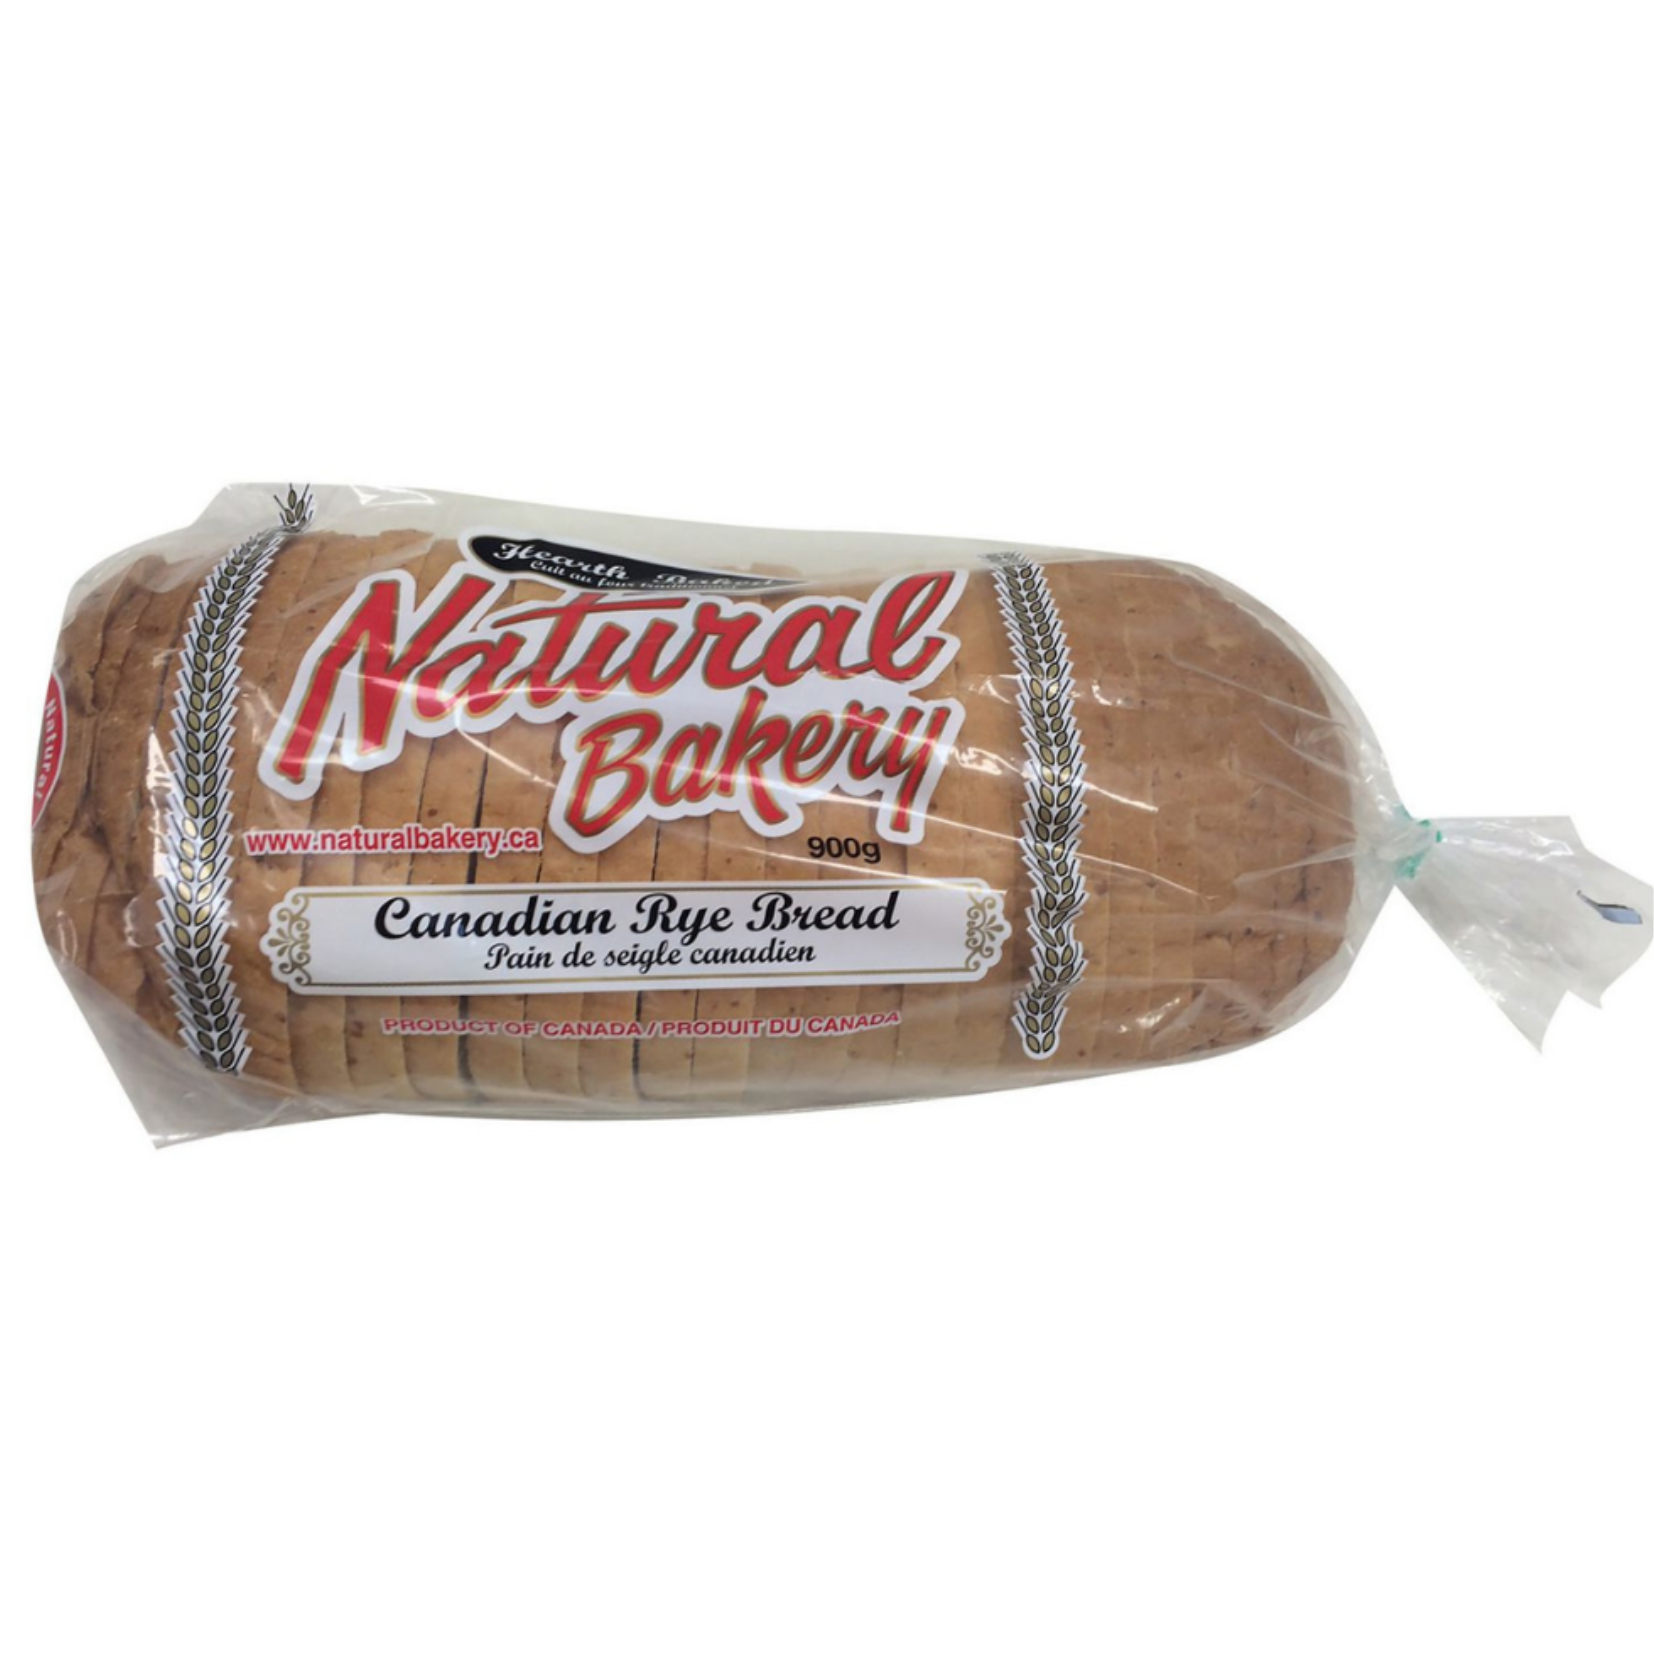 Natural Bakery Canadian Rye Bread 900g